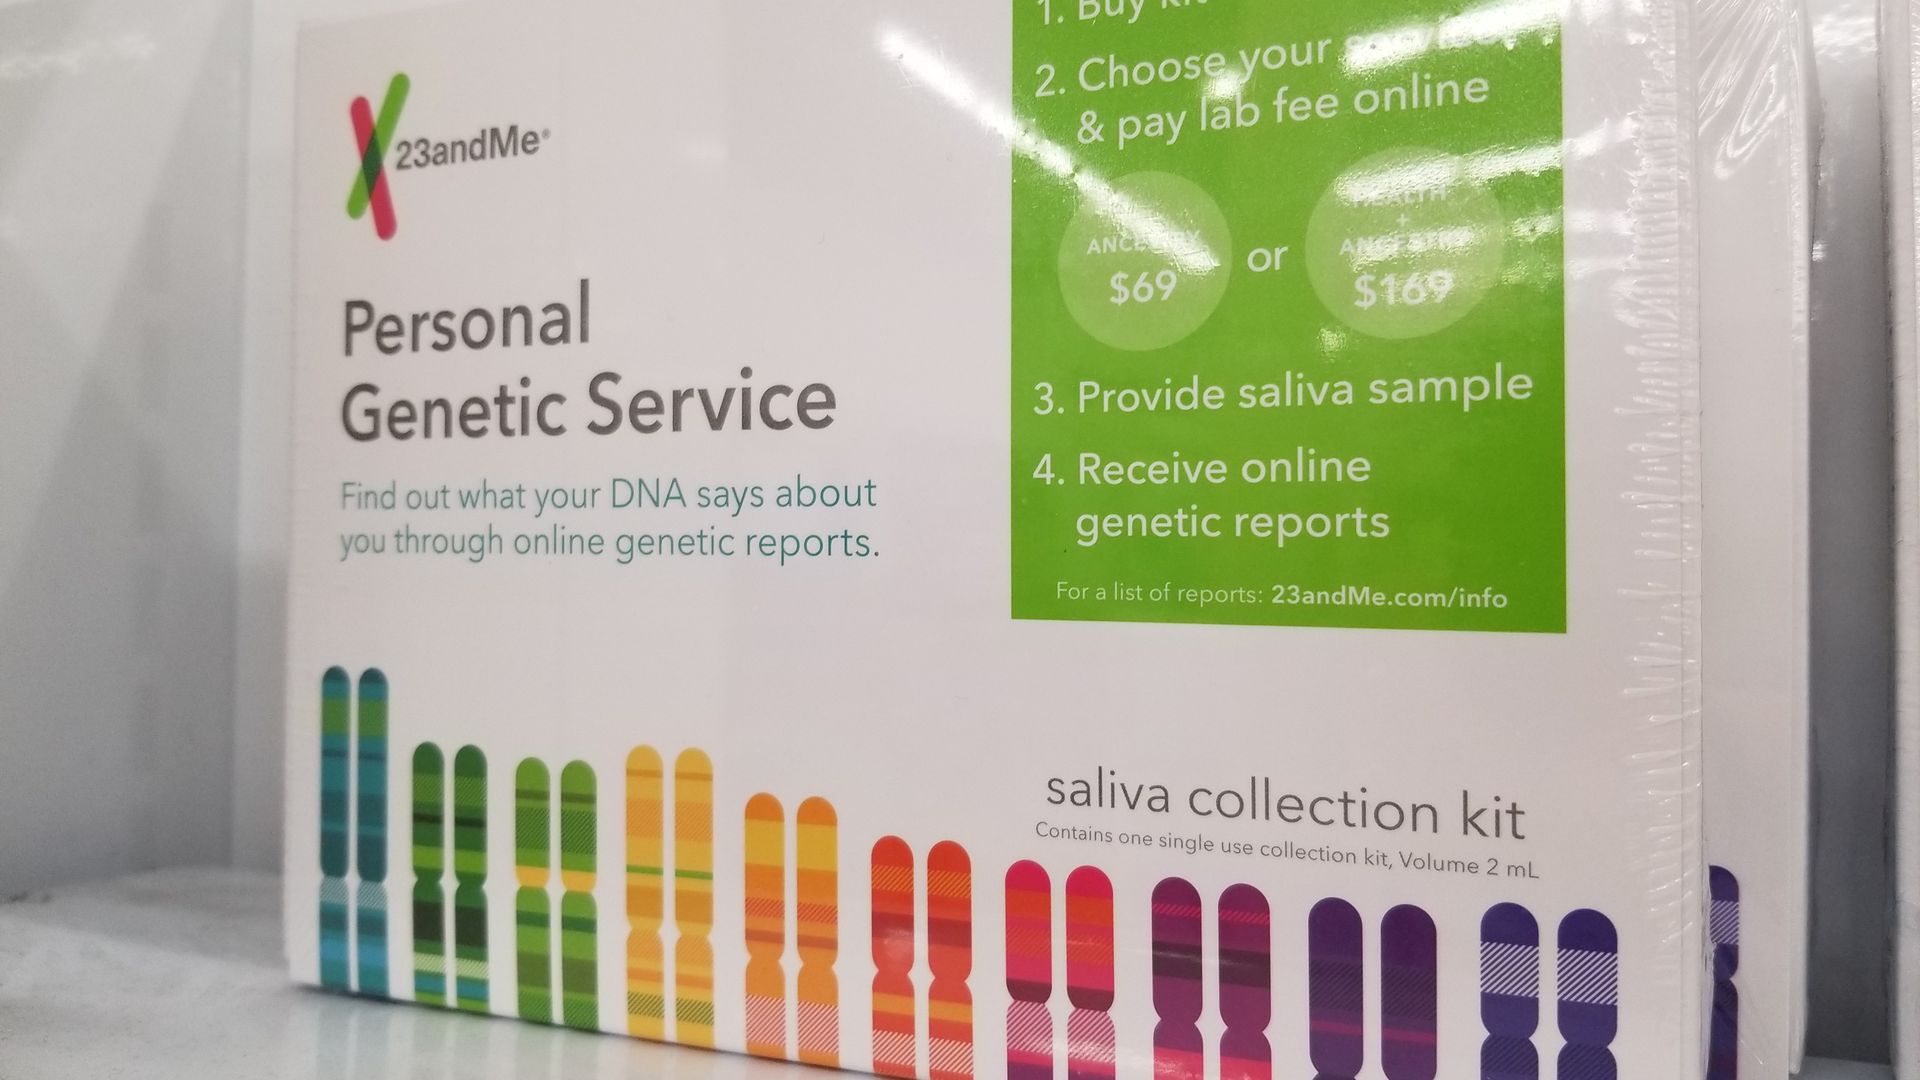 Pentagon warns military not to use consumer DNA test kits - ABC News